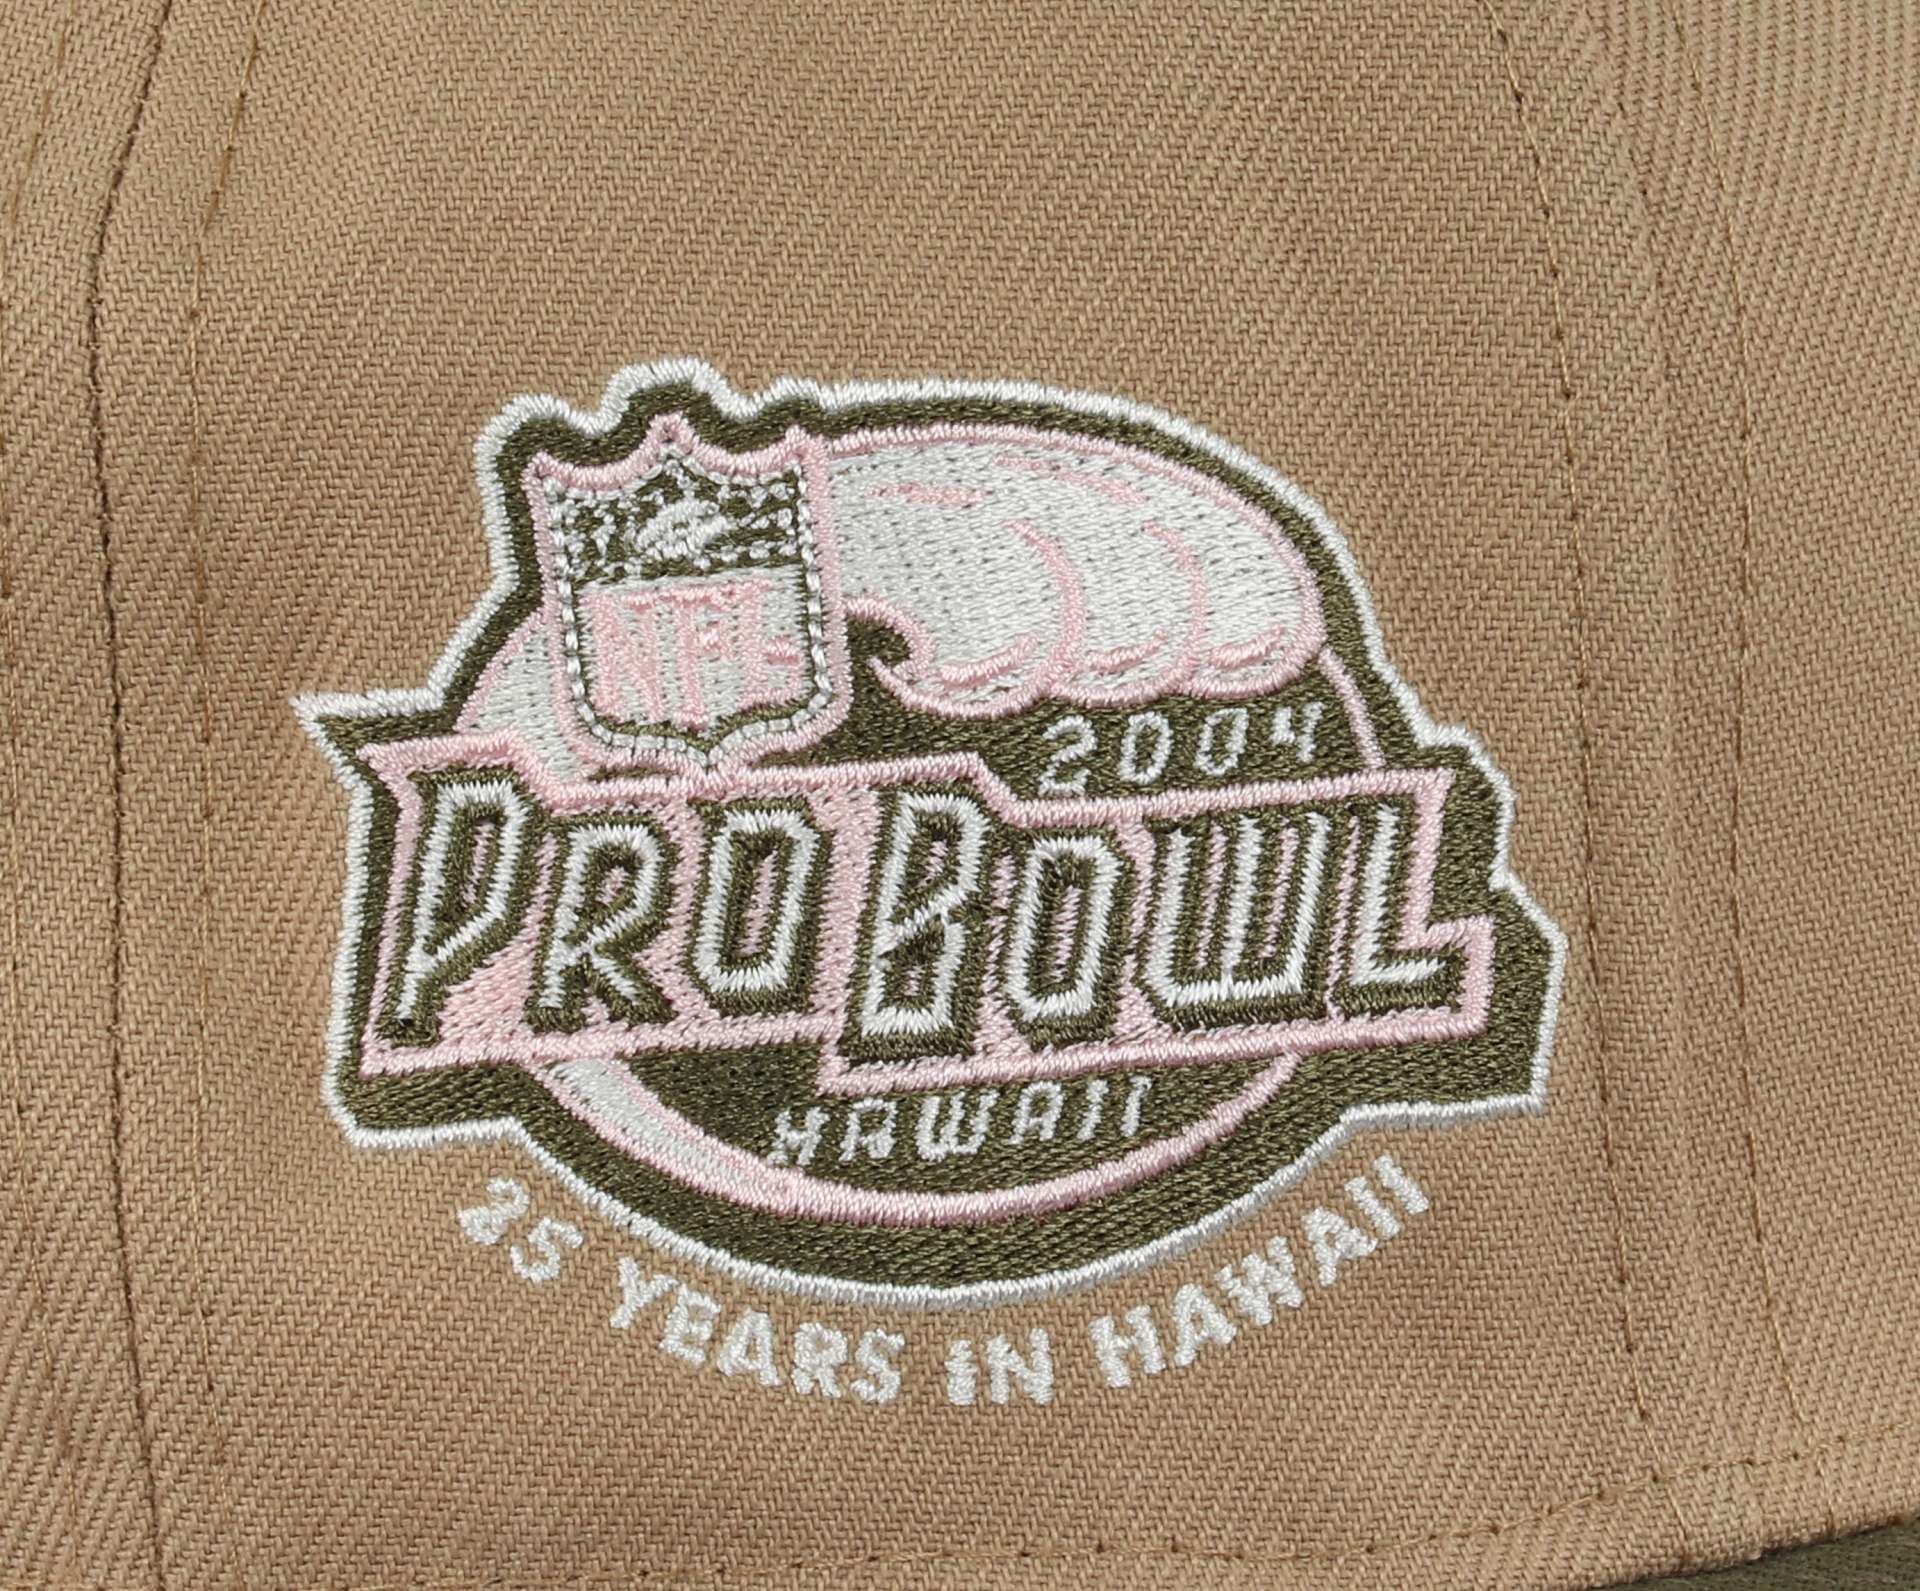 Miami Dolphins NFL Pro Bowl Hawaii 2004 Sidepatch Camel Olive 59Fifty Basecap New Era